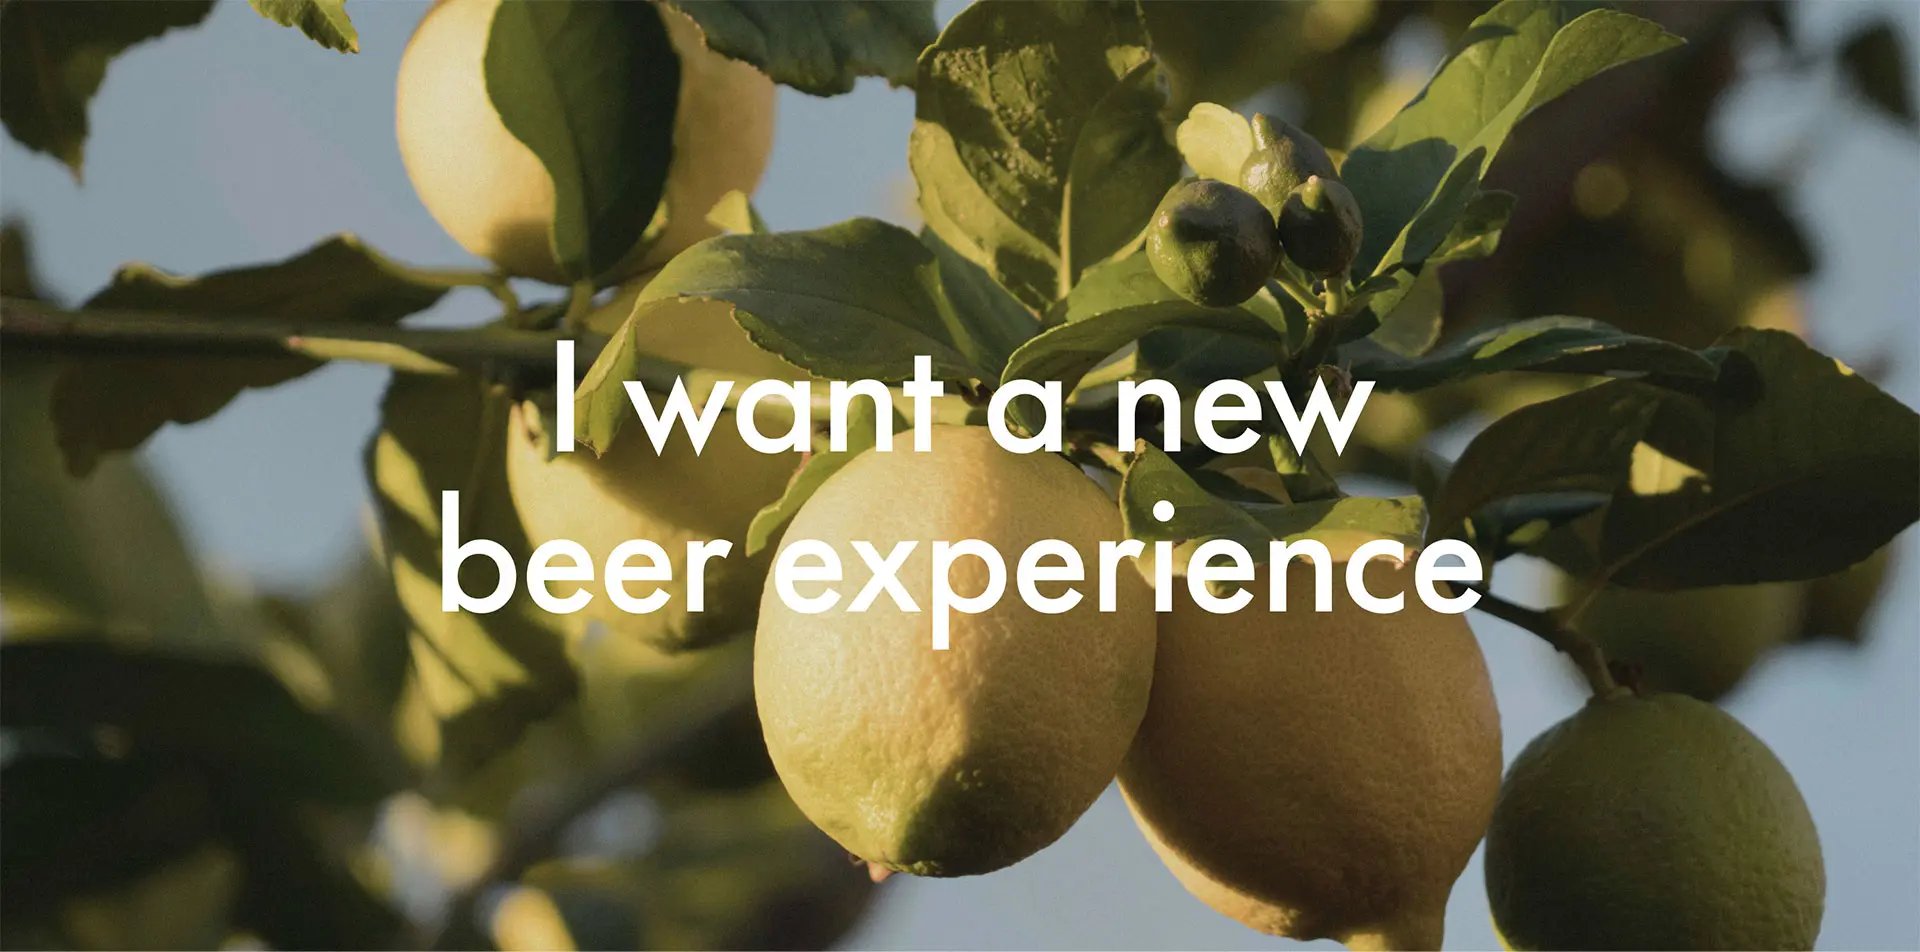 I want a new beer experience